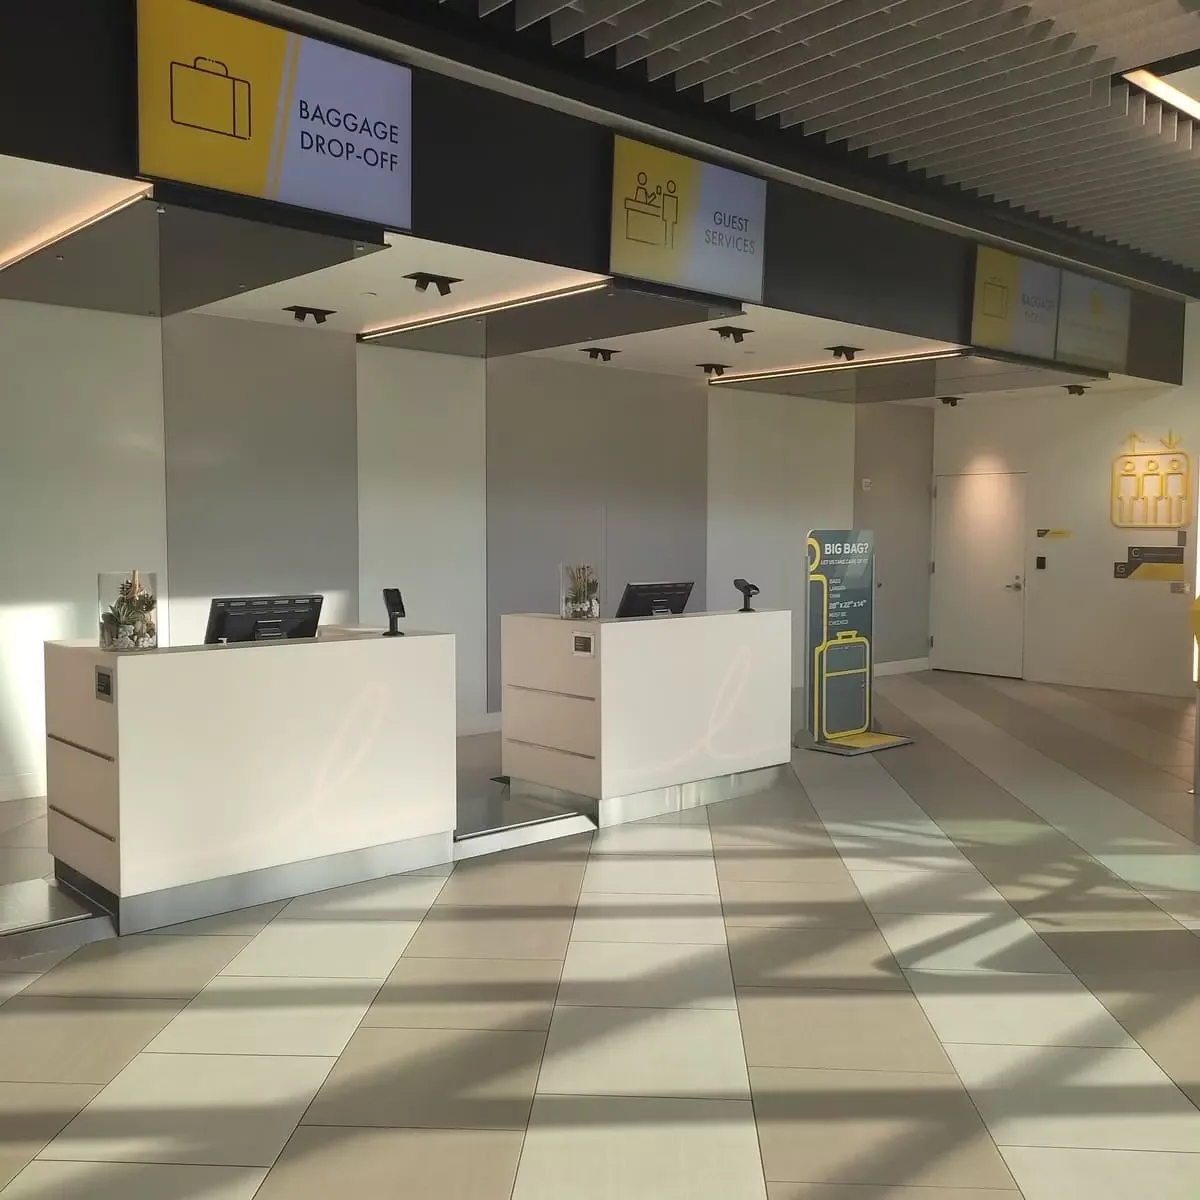 Empty entrance hall of Fort Lauderdale's Brightline Station with Baggage Drop-off and Guest Services